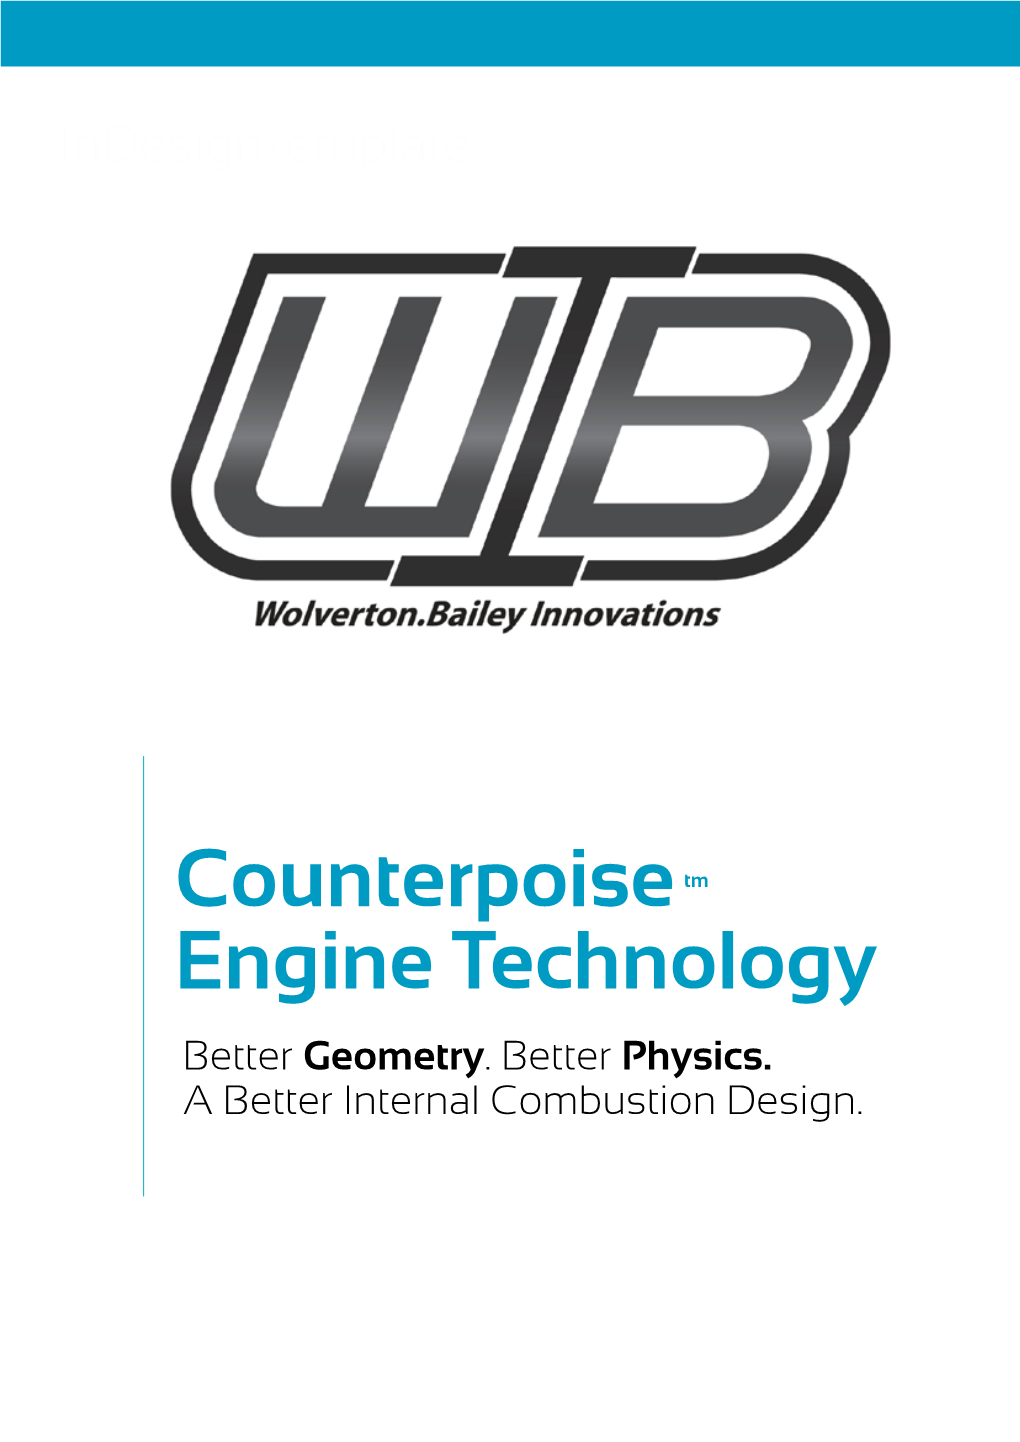 Counterpoise Engine Technology